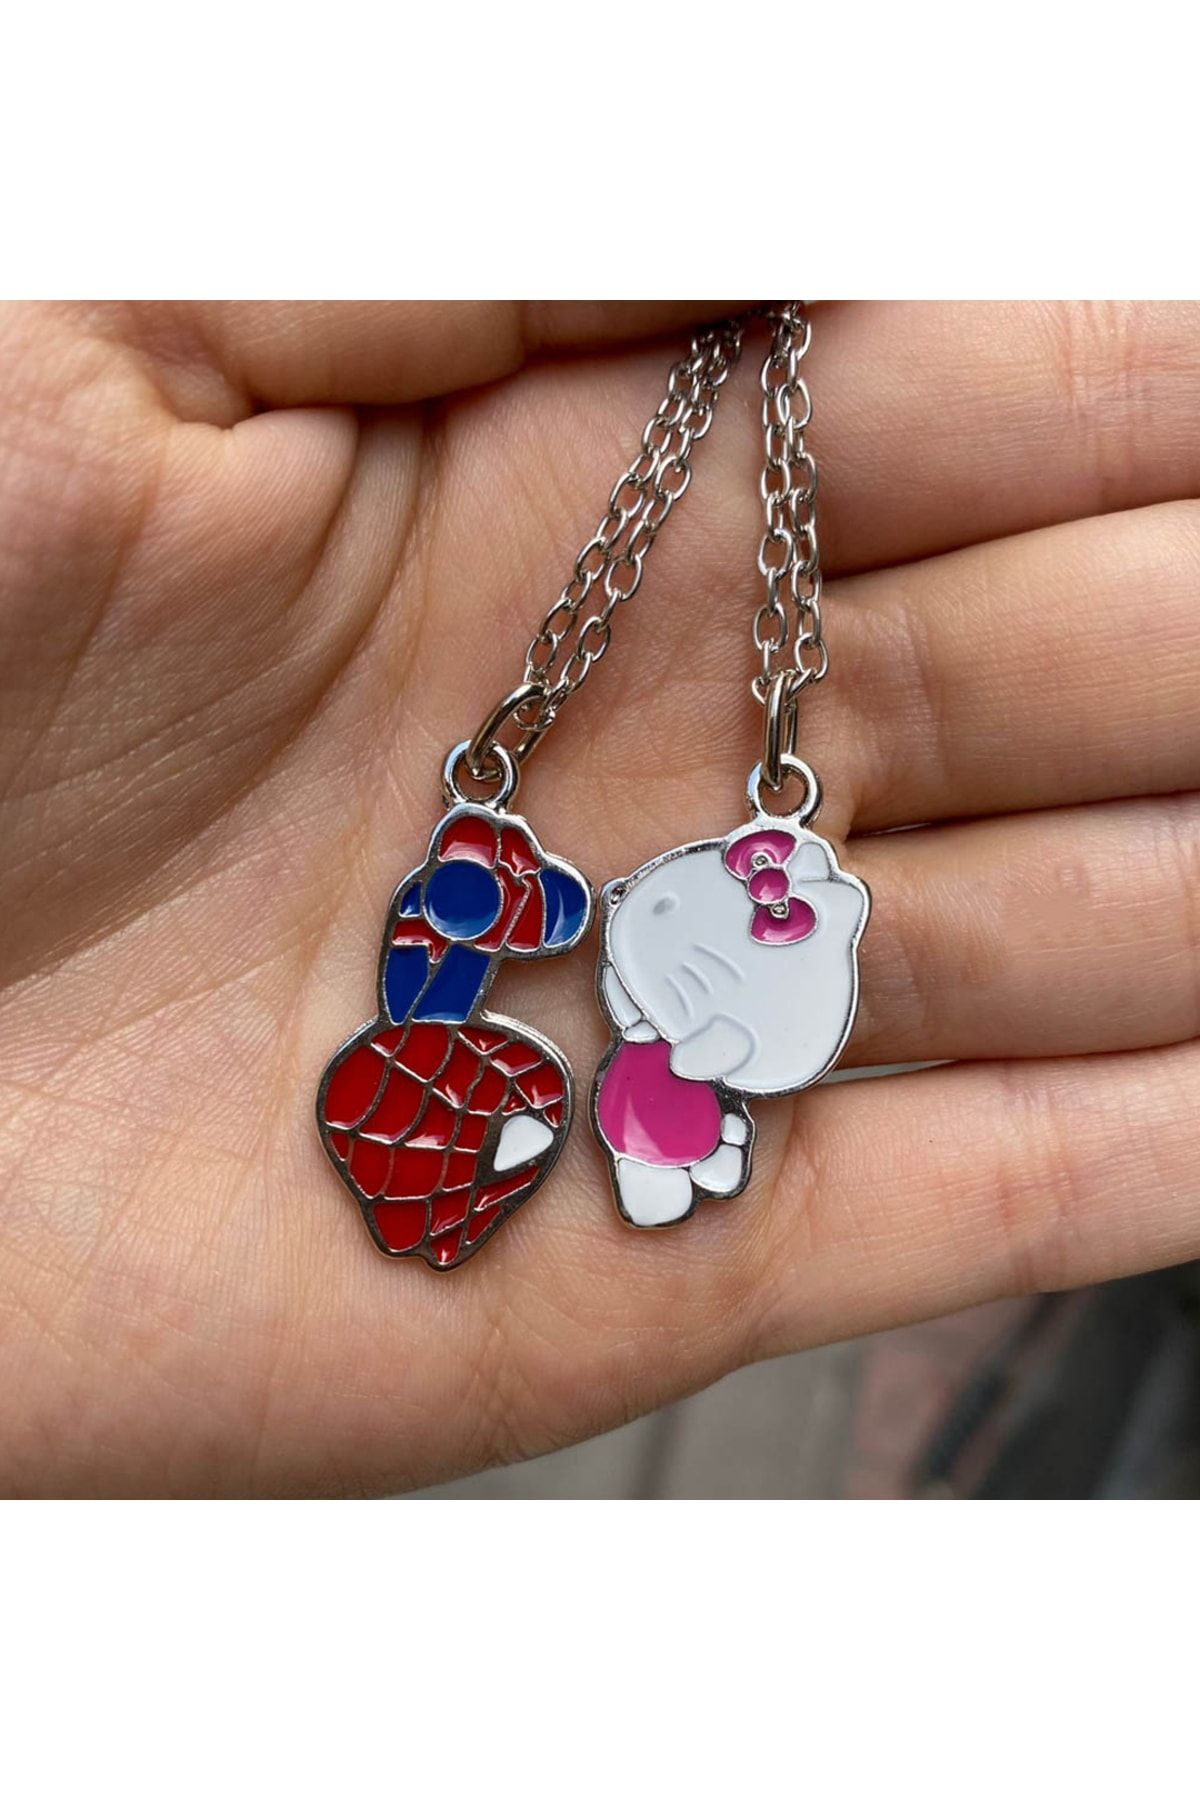 𝖊𝖛𝖊𝖑𝖞𝖓𝖘𝖔𝖗𝖎𝖌𝖎𝖓𝖆𝖑💘 on Instagram: Hello Kitty X Spider Man  🎀🕷️ Now Available🩷! Link In Bio To Shop🛍️ Handmade With 925 Sterling  Silver Beads, Every Order Gets FREE Candy & A FREE Cleaning Cloth